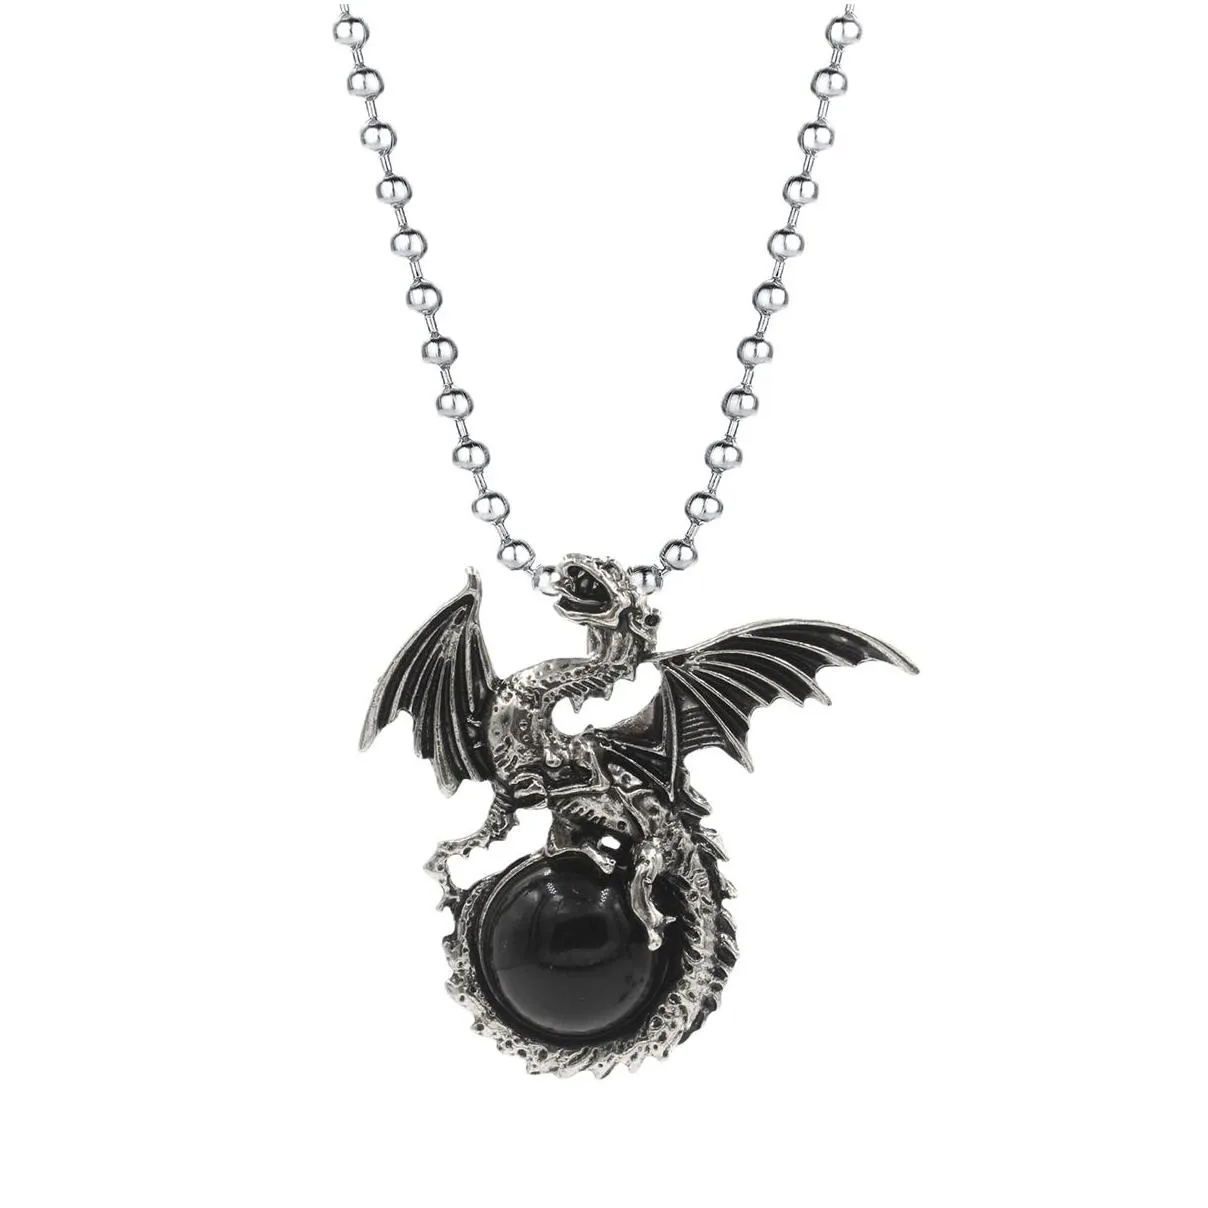 Vintage Fly Dragon Necklaces Stainless Steel Beaded Chain Natural Stone Crystal Pendant Necklace For Men Punk Jewelry